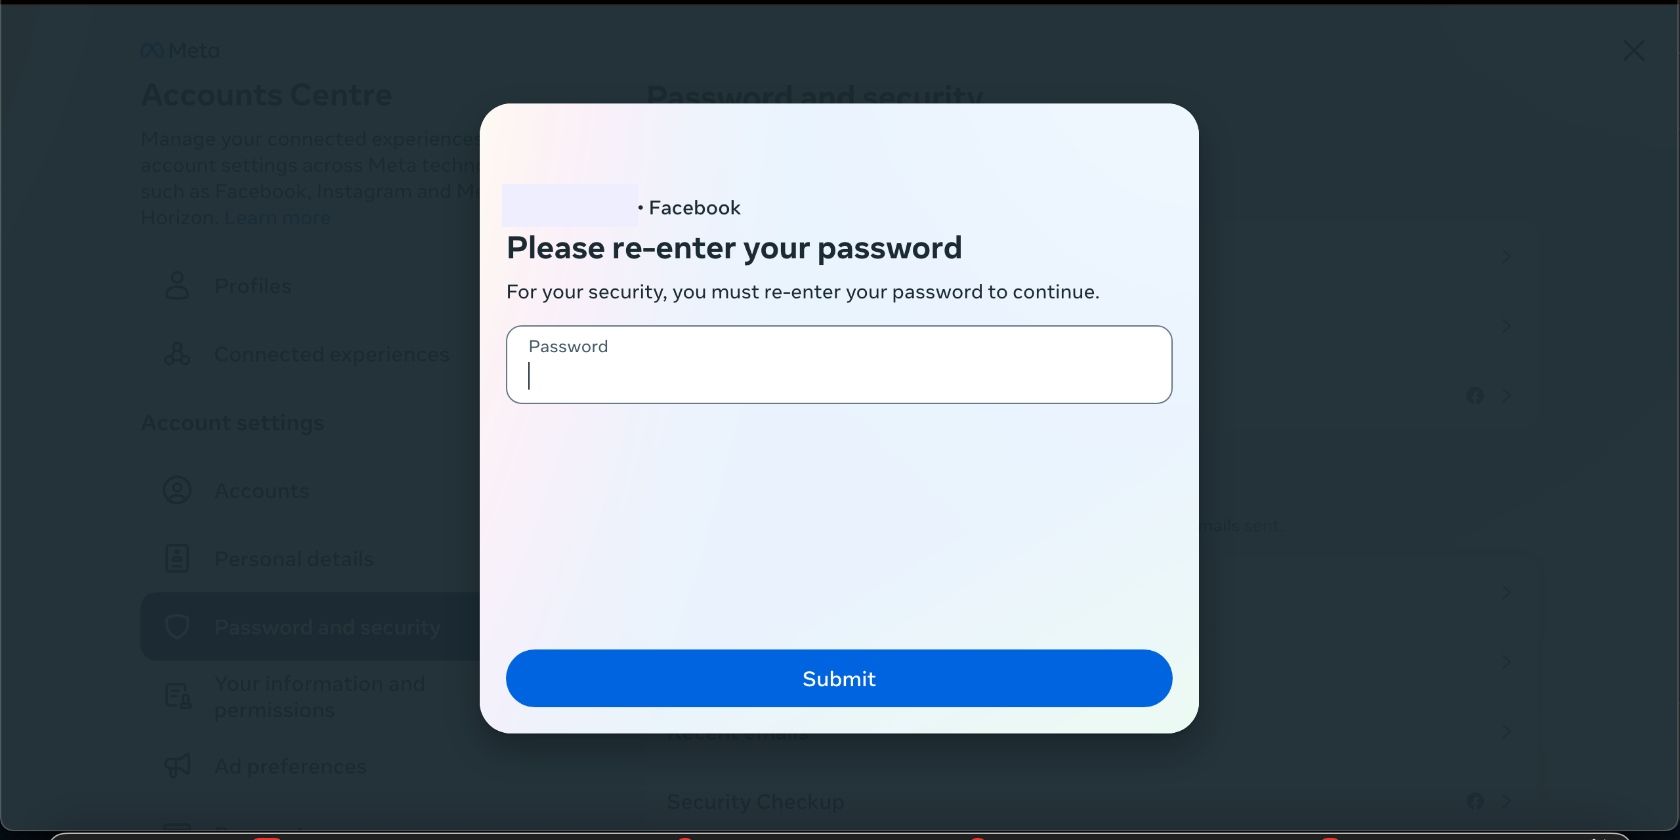 Re-entering password to enable two-factor authentication on Facebook